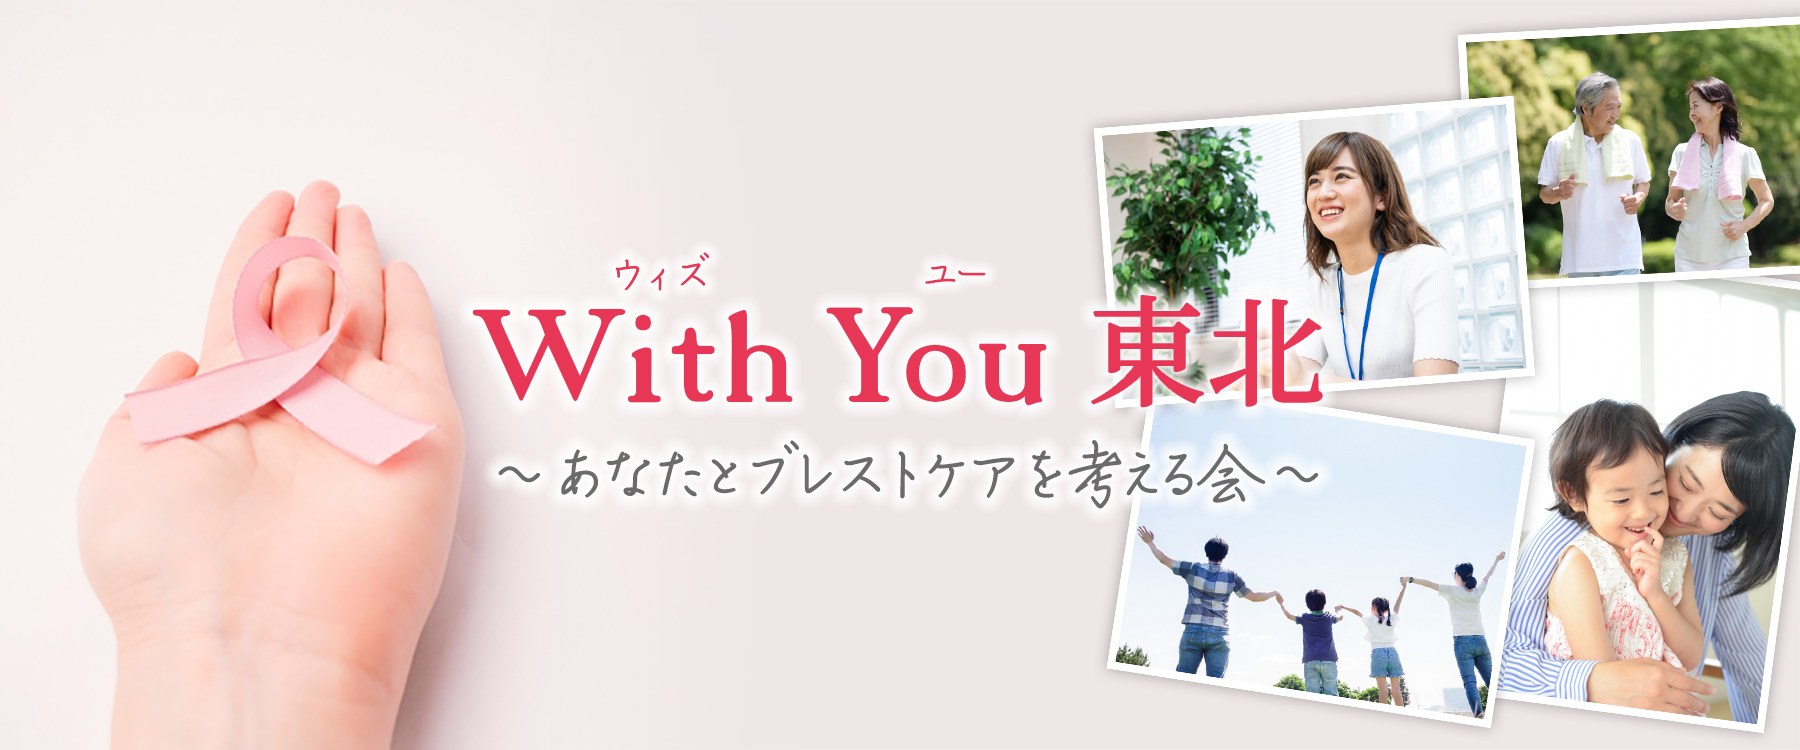  With You 東北〜あなたとブレストケアを考える会